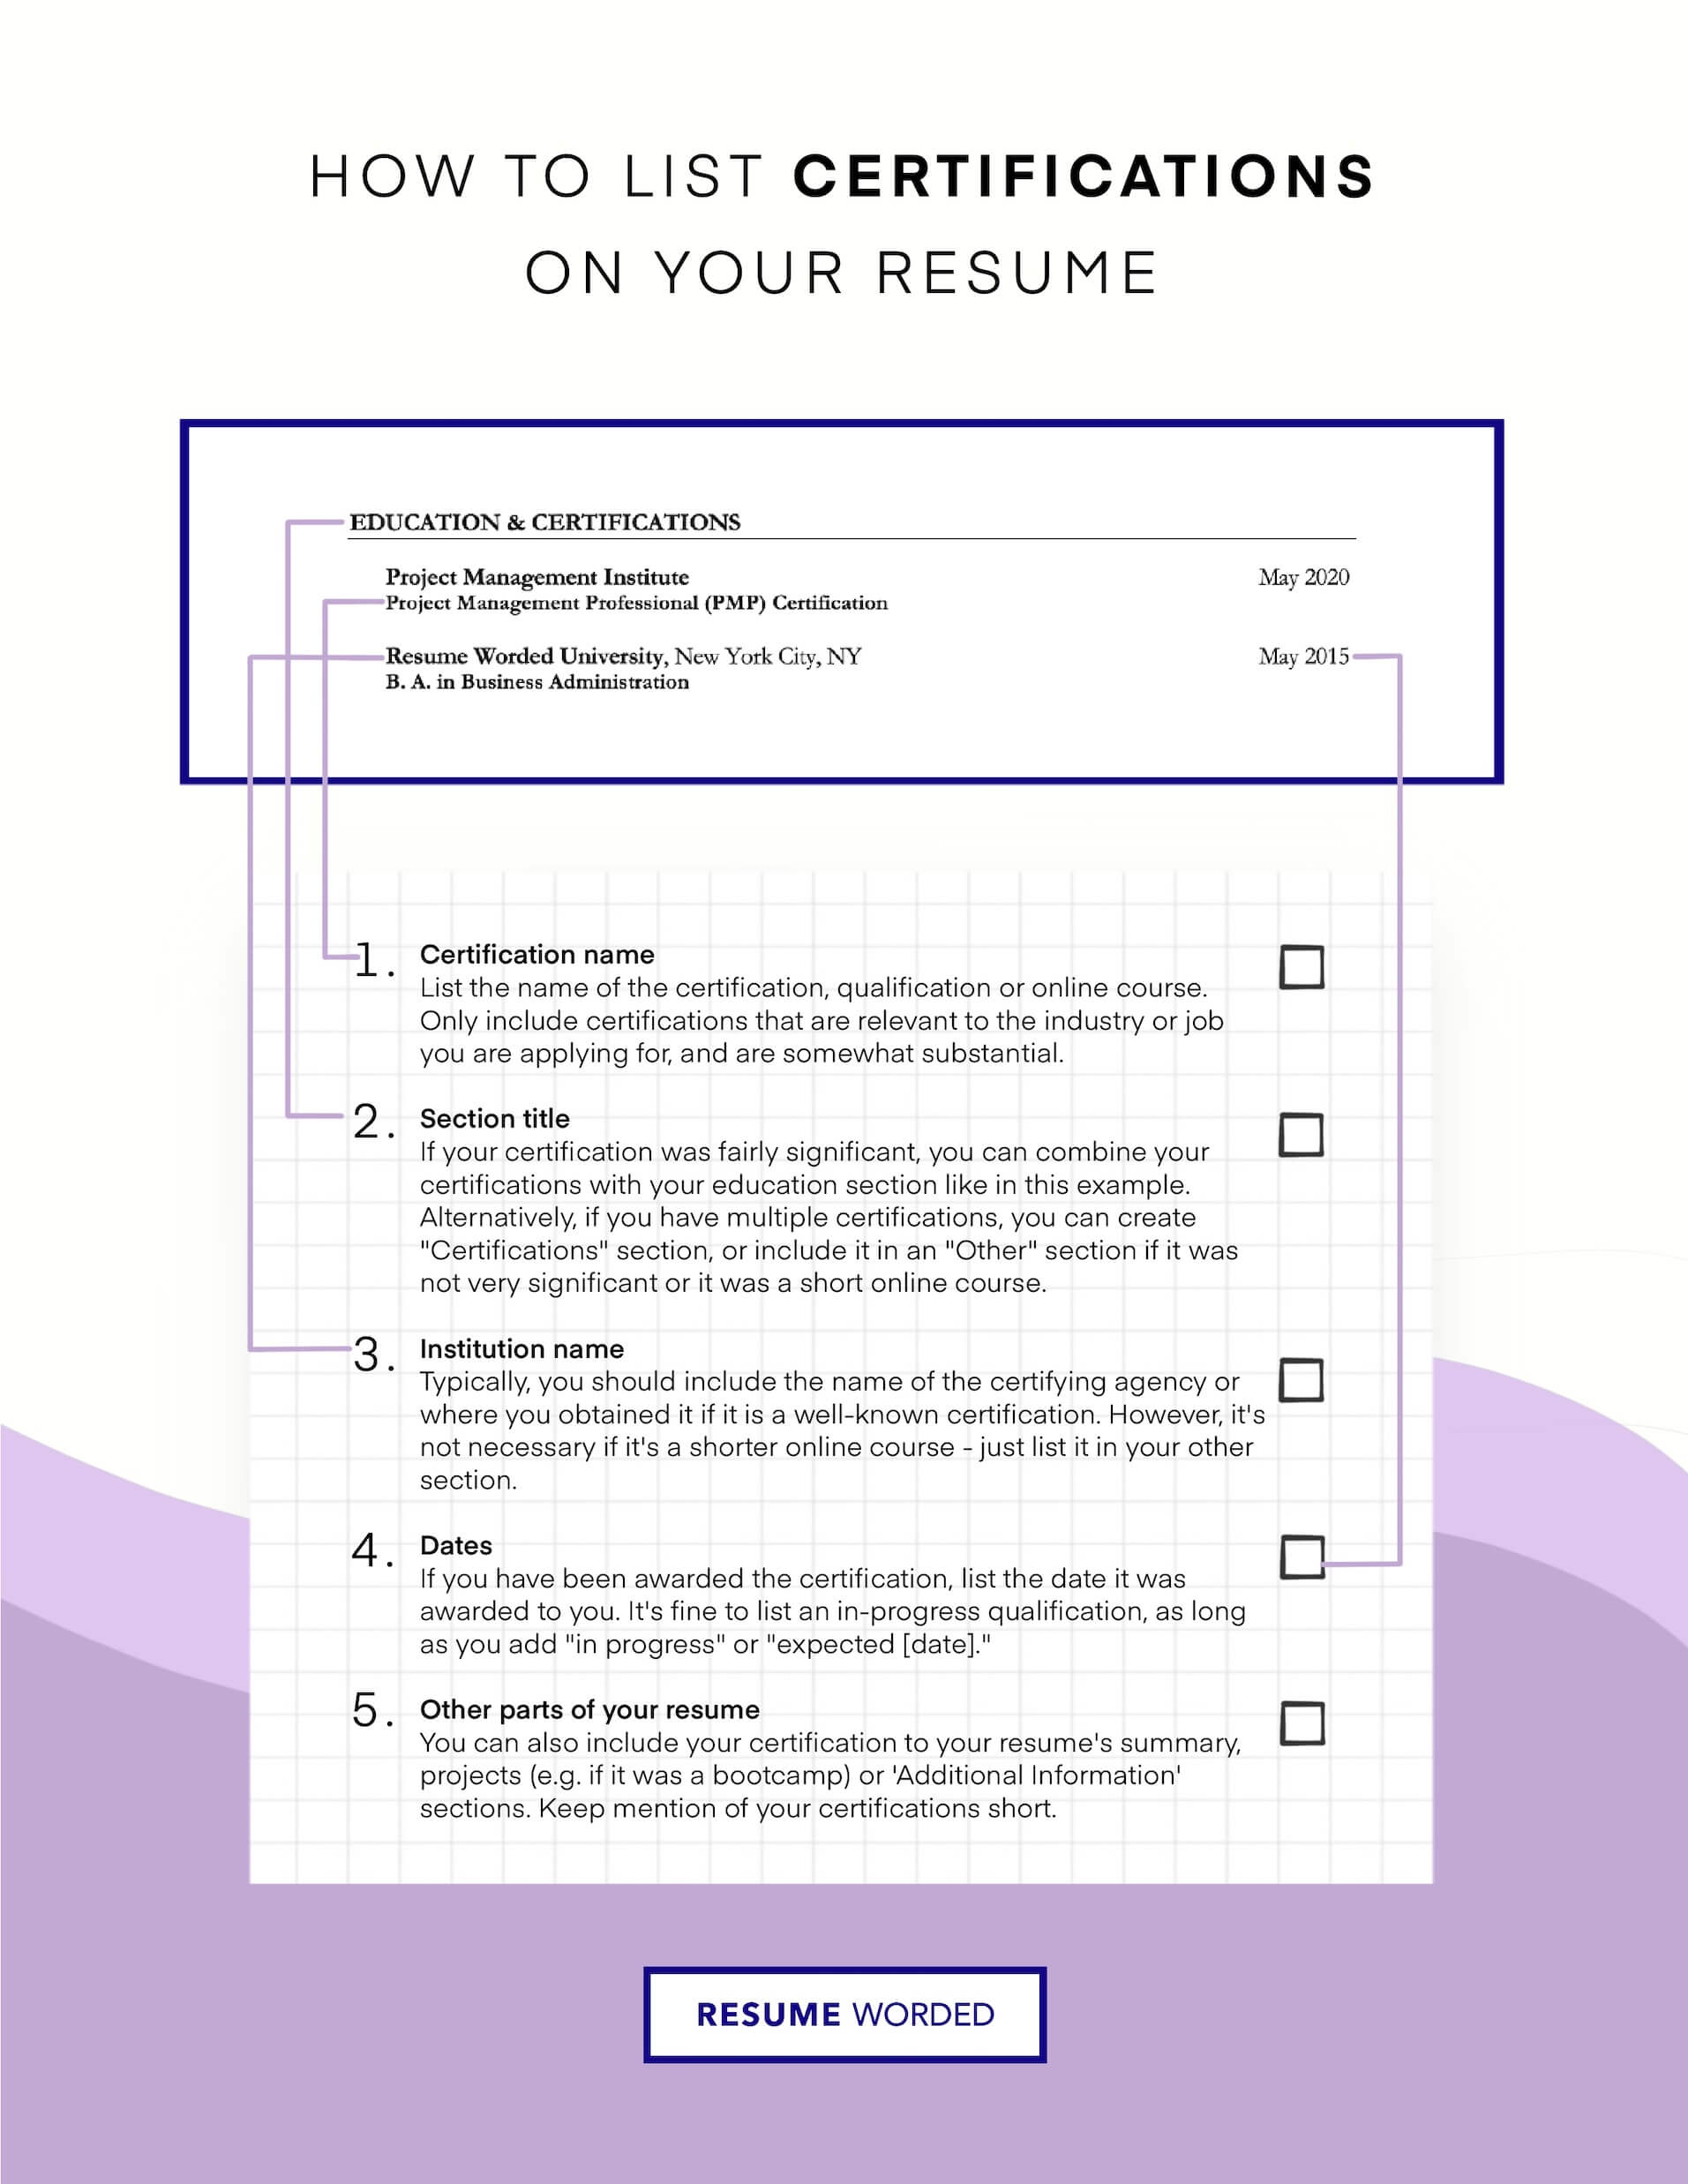 Include Trade-specific certification - Buyer  Resume